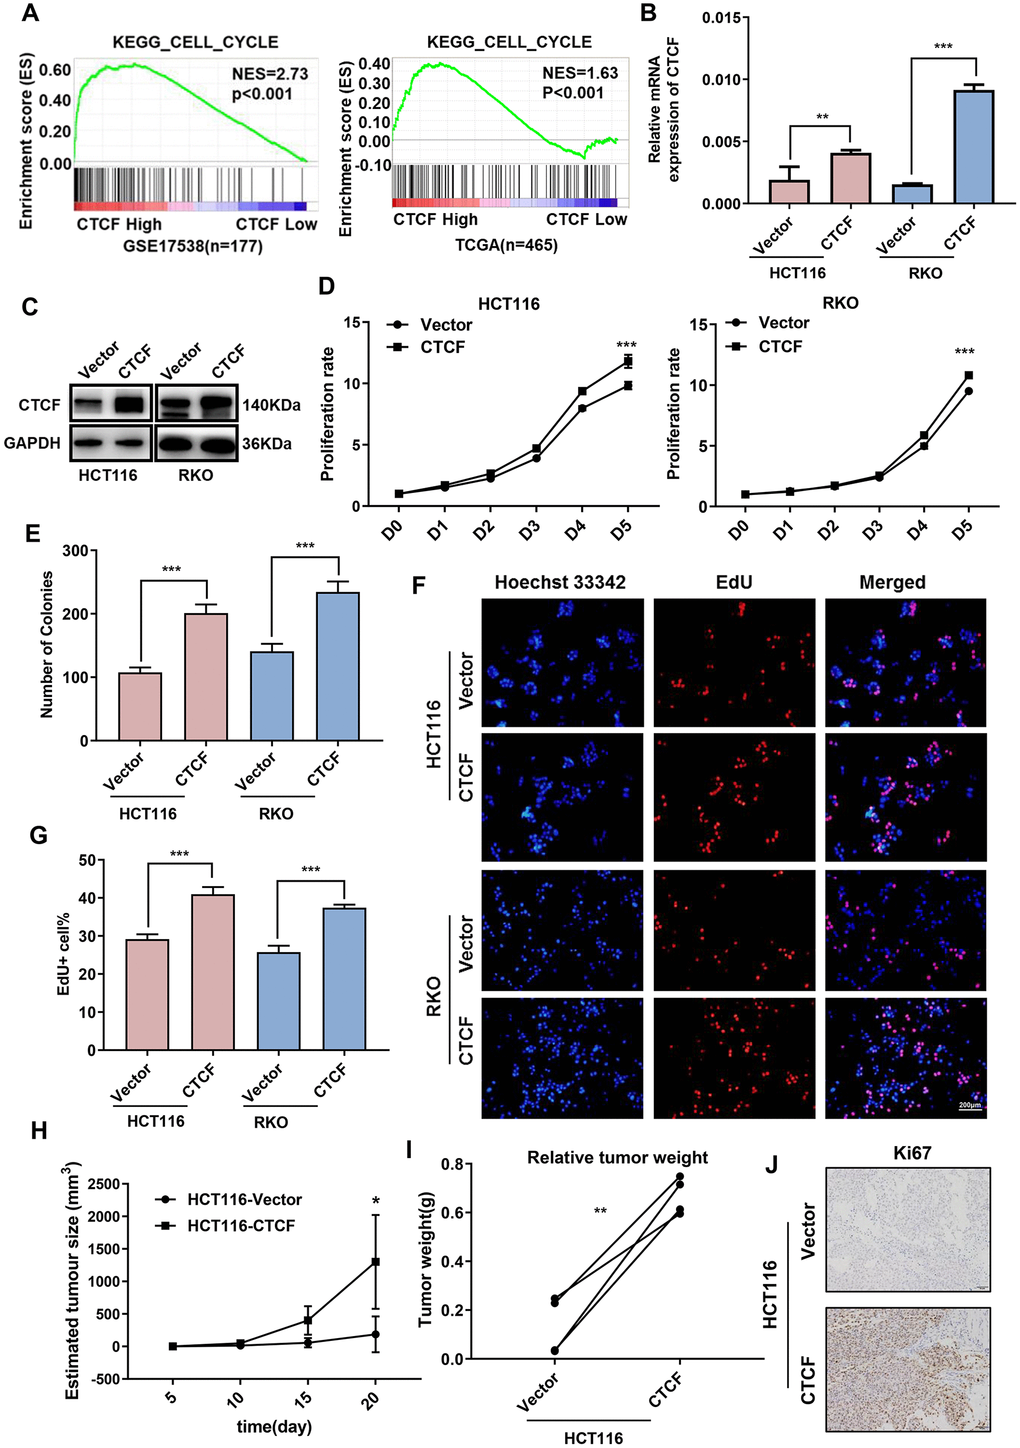 Upregulation of CTCF promotes human CRC cells proliferation. (A) GSEA plot indicated that high expression of CTCF is positively correlated with the cell cycle gene set signatures (KEGG